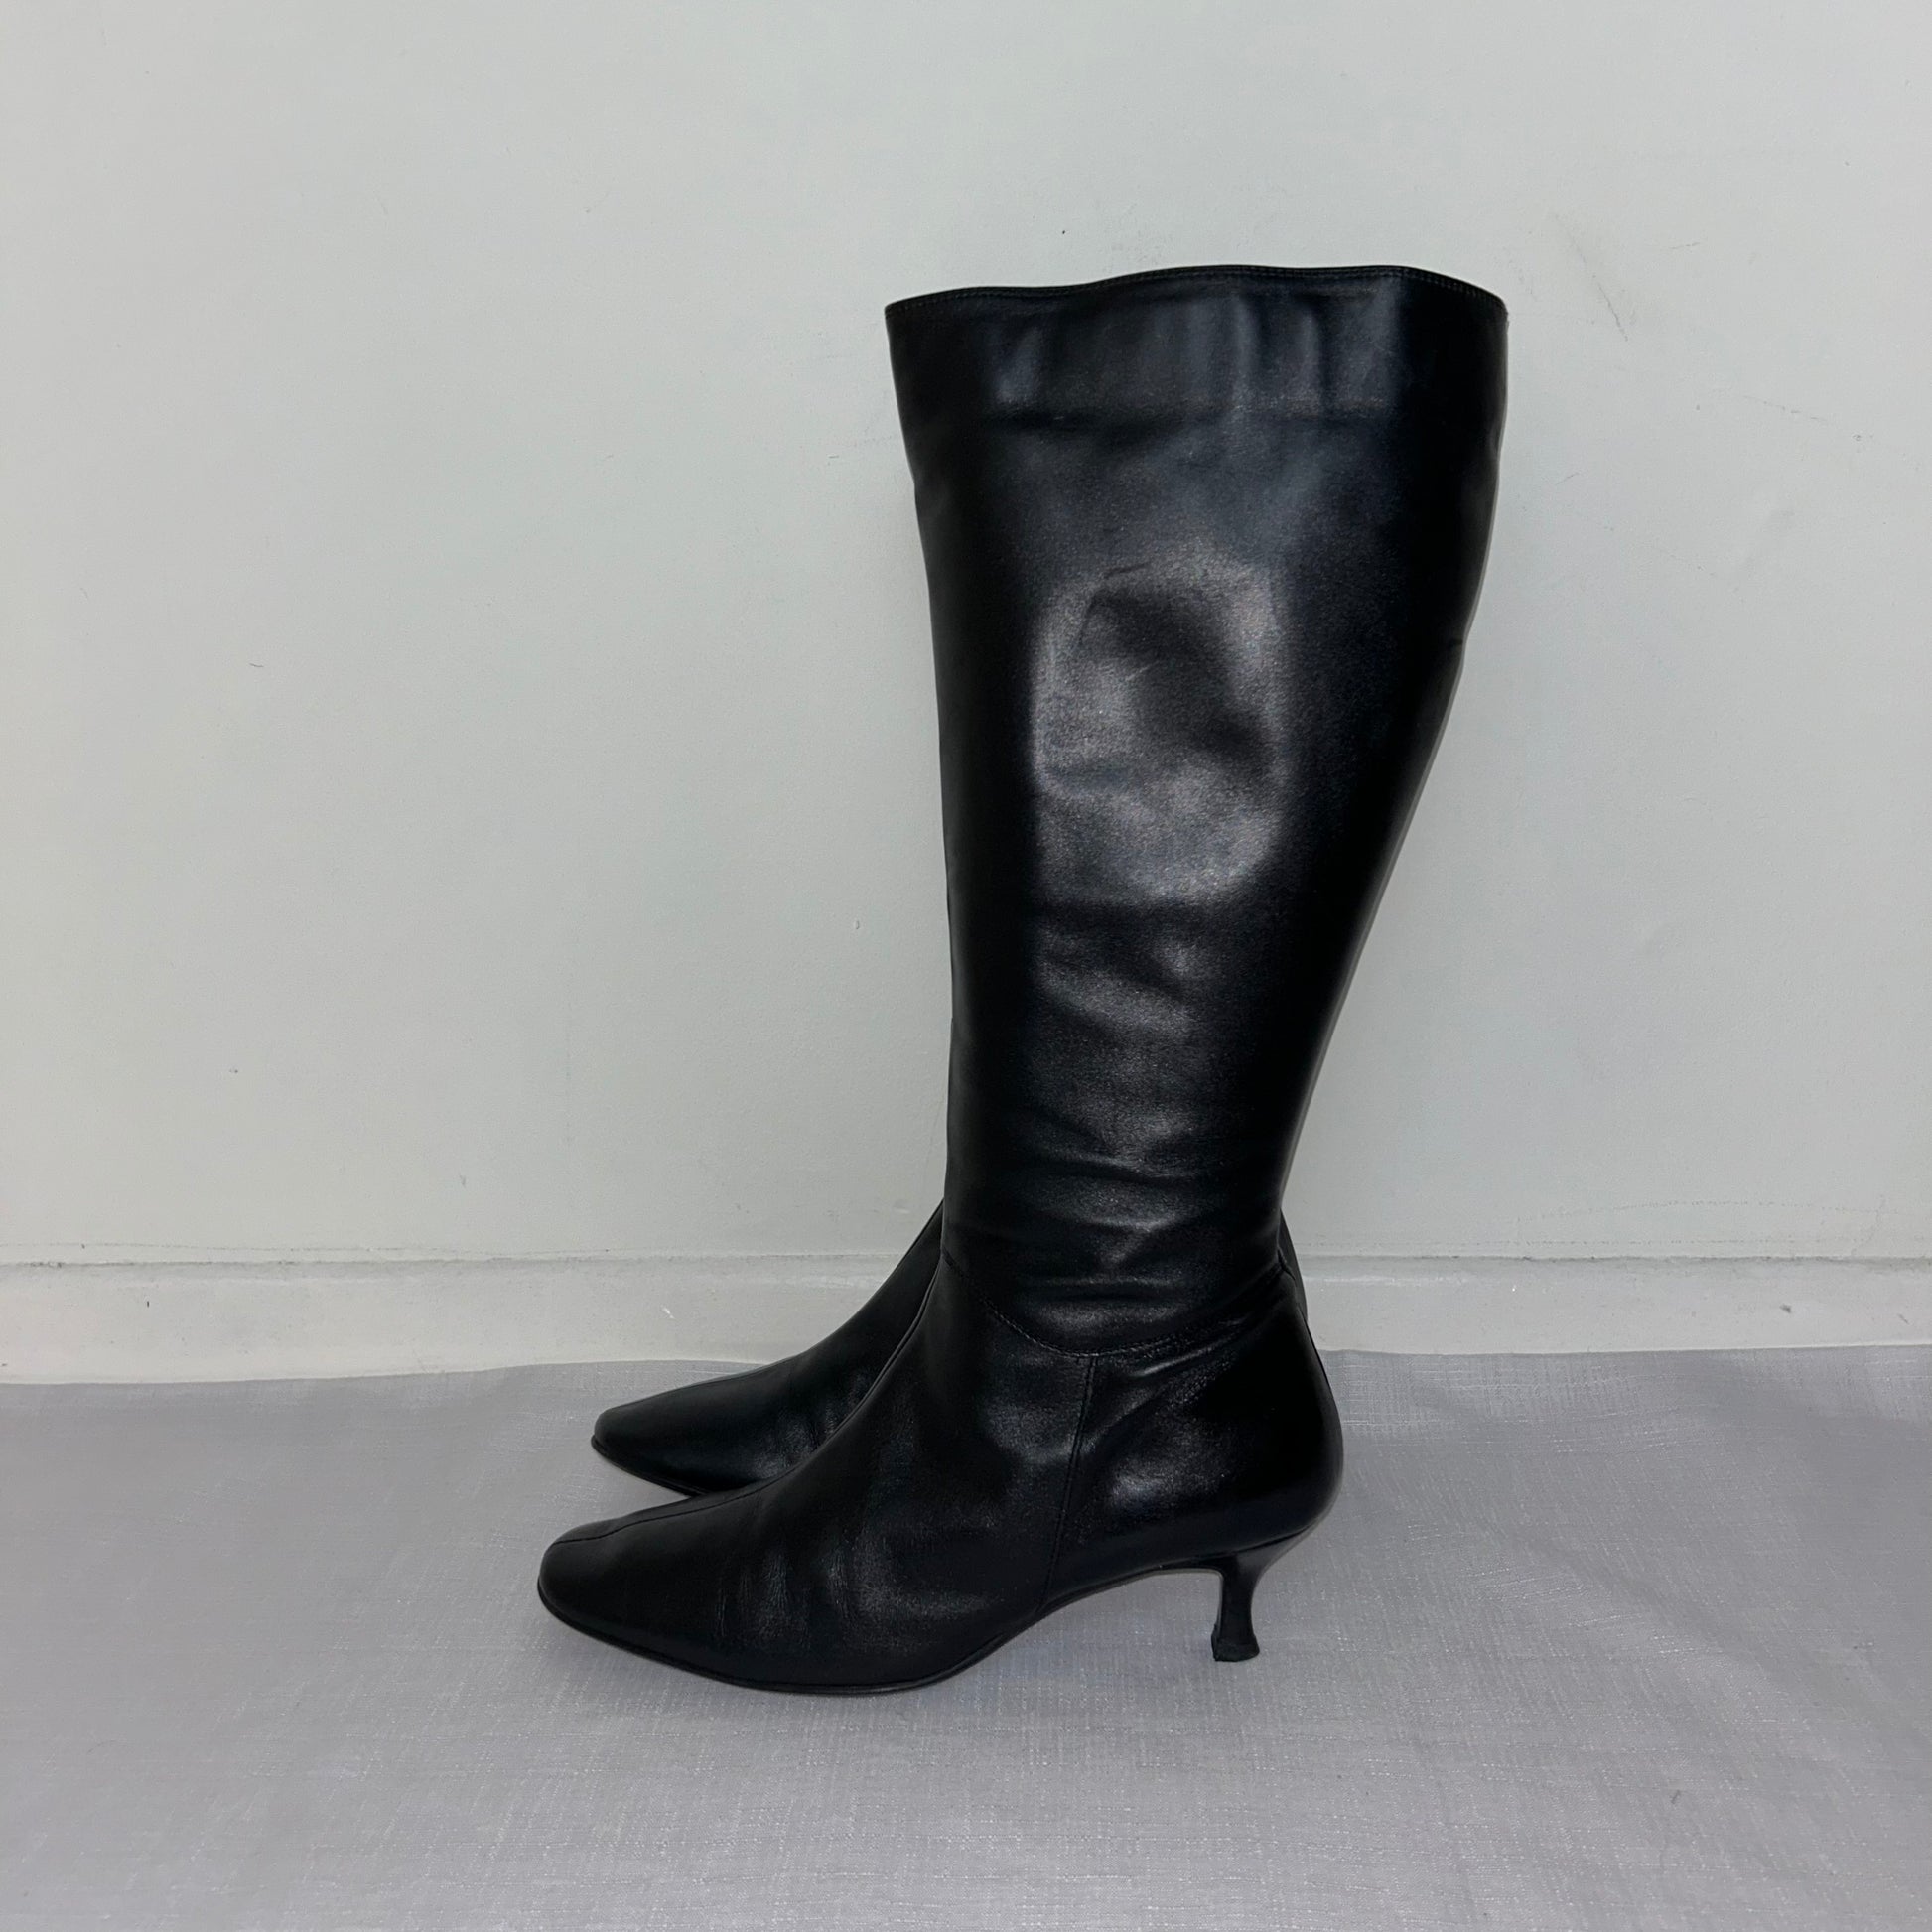 black knee high boots shown on a white background